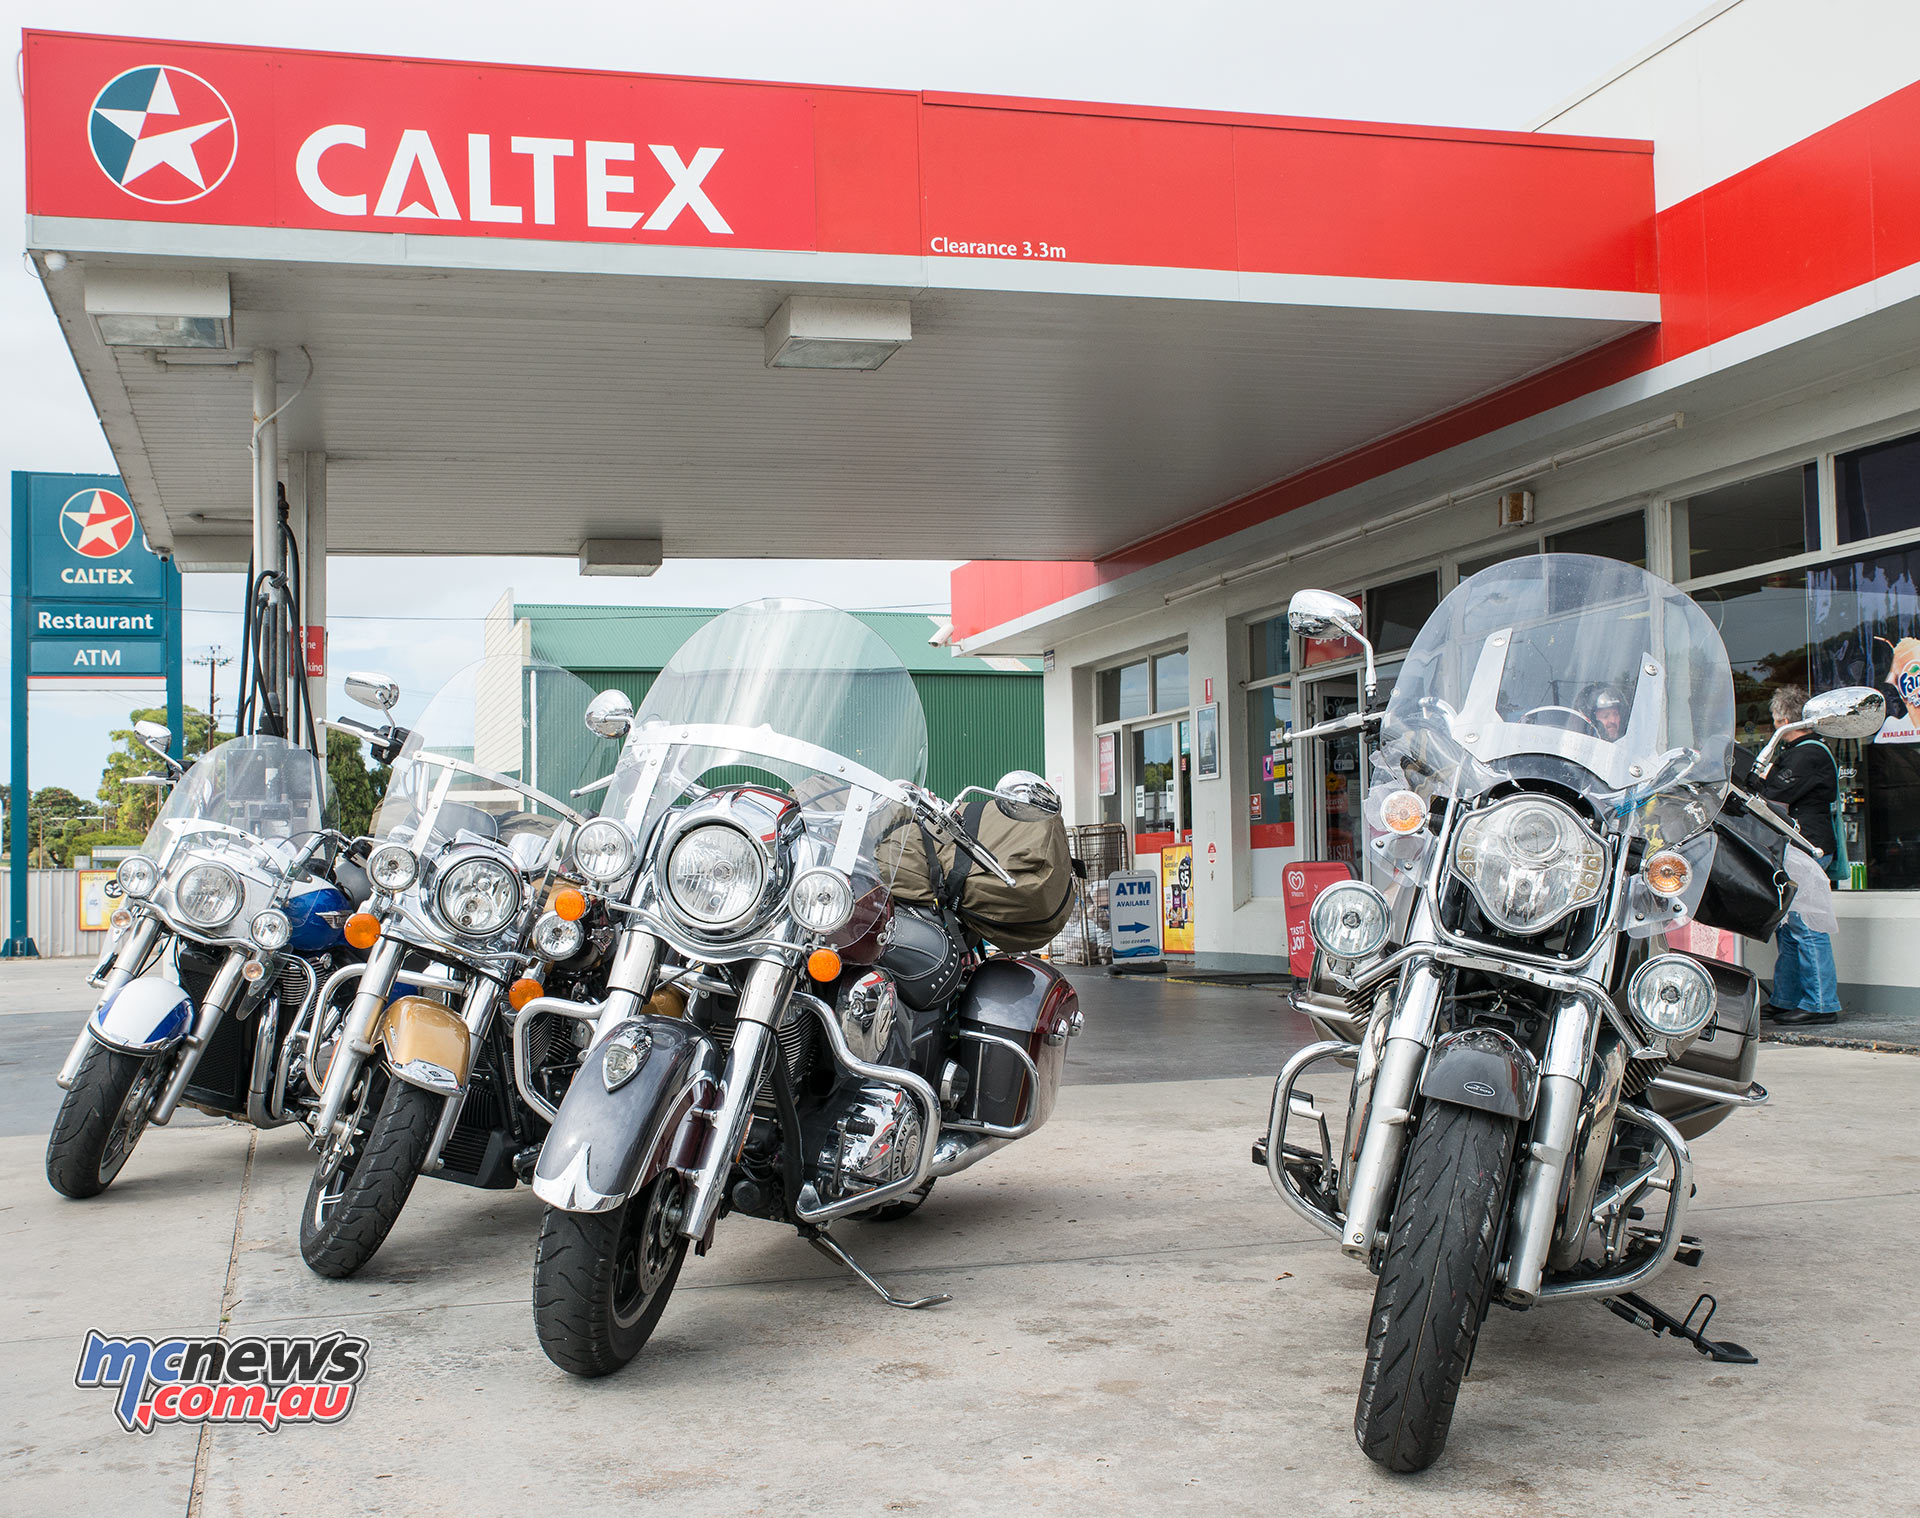 Filling up with Vortex 98 at the Caltex in Meningie